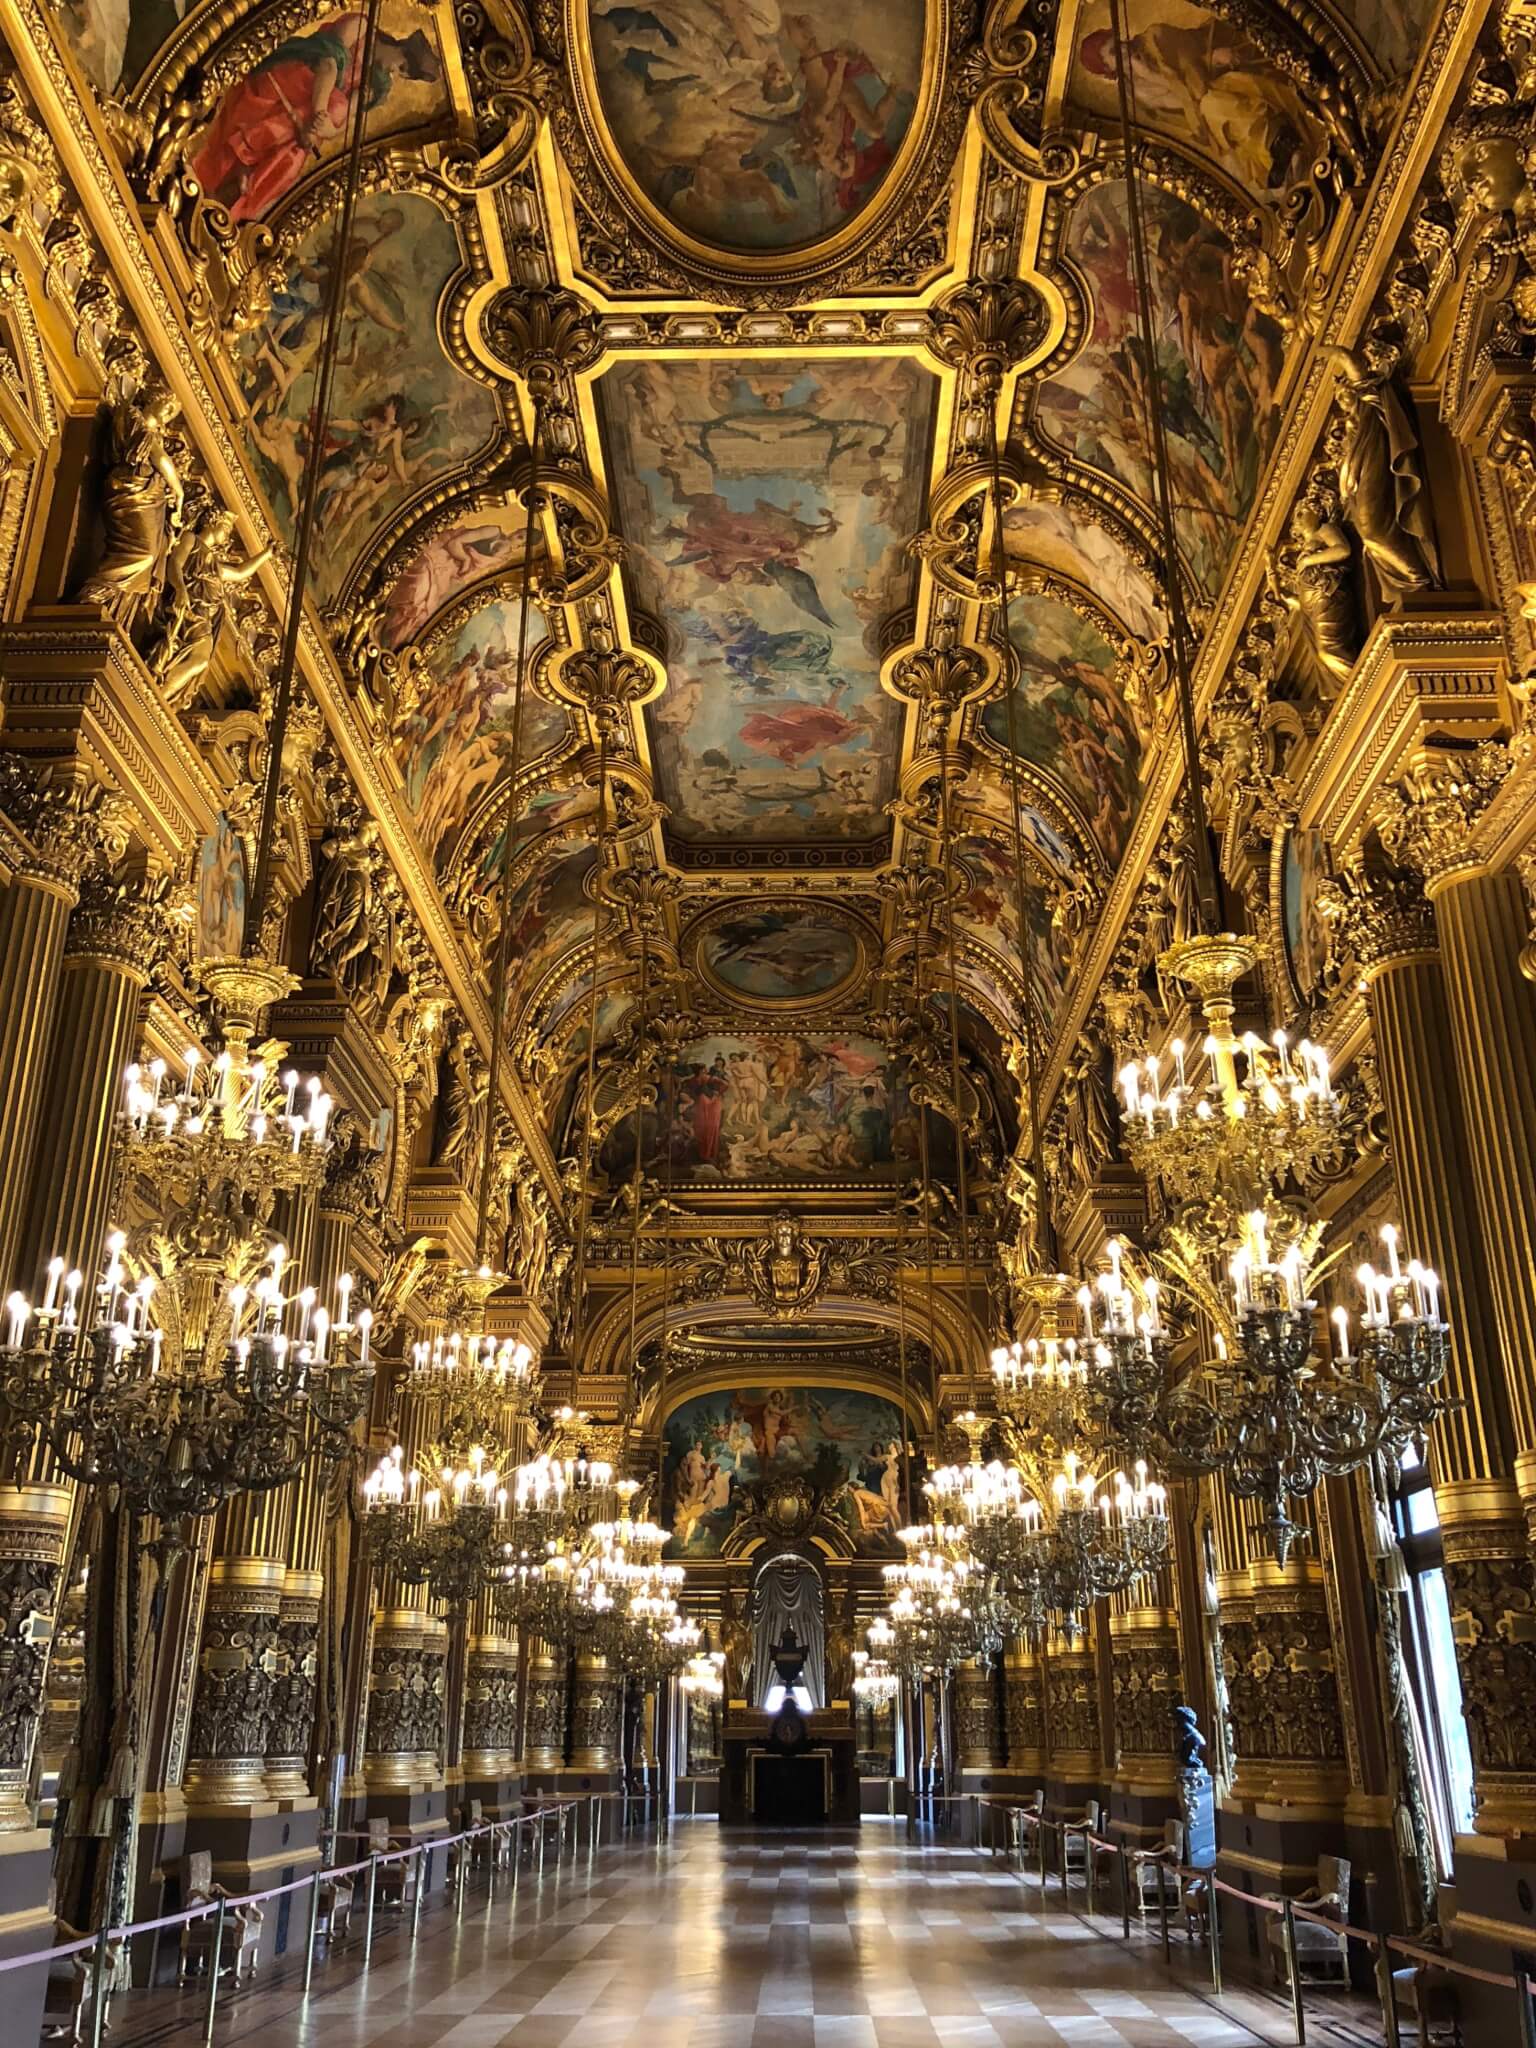 Inside the Palais Garnier, the grand 19th century opera house where every professional dancer would dream to dance in.  